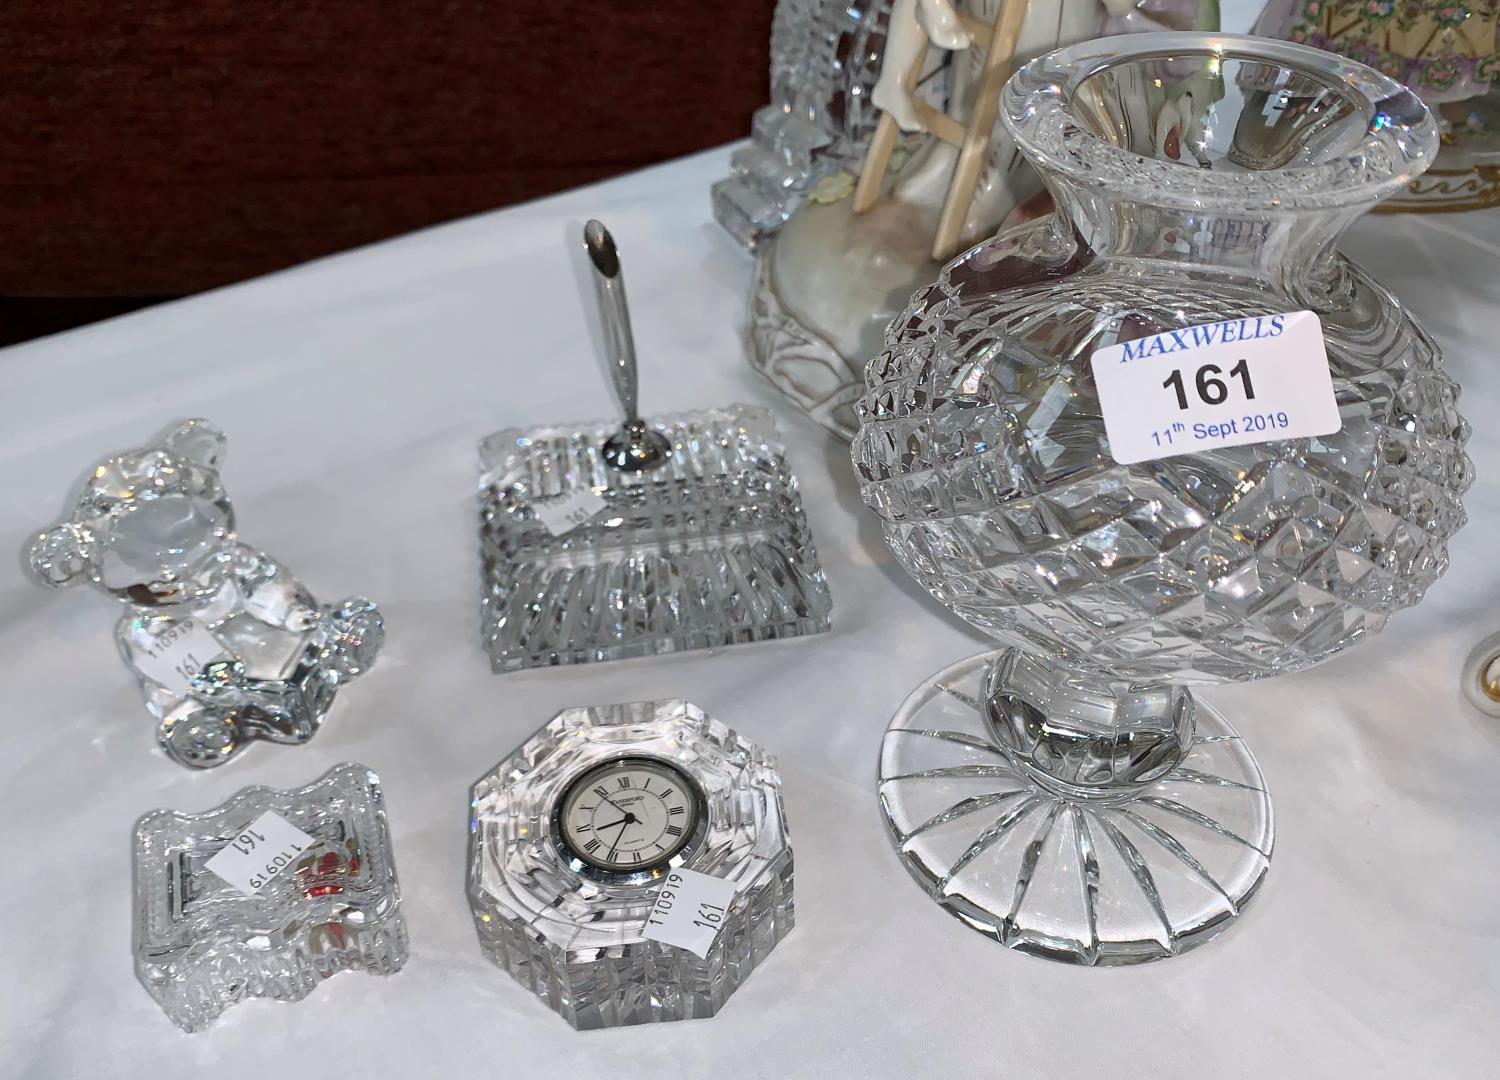 A Waterford Crystal candle lamp, height 7.5"; 4 other pieces: clock/paperweight; pan stand; teddy